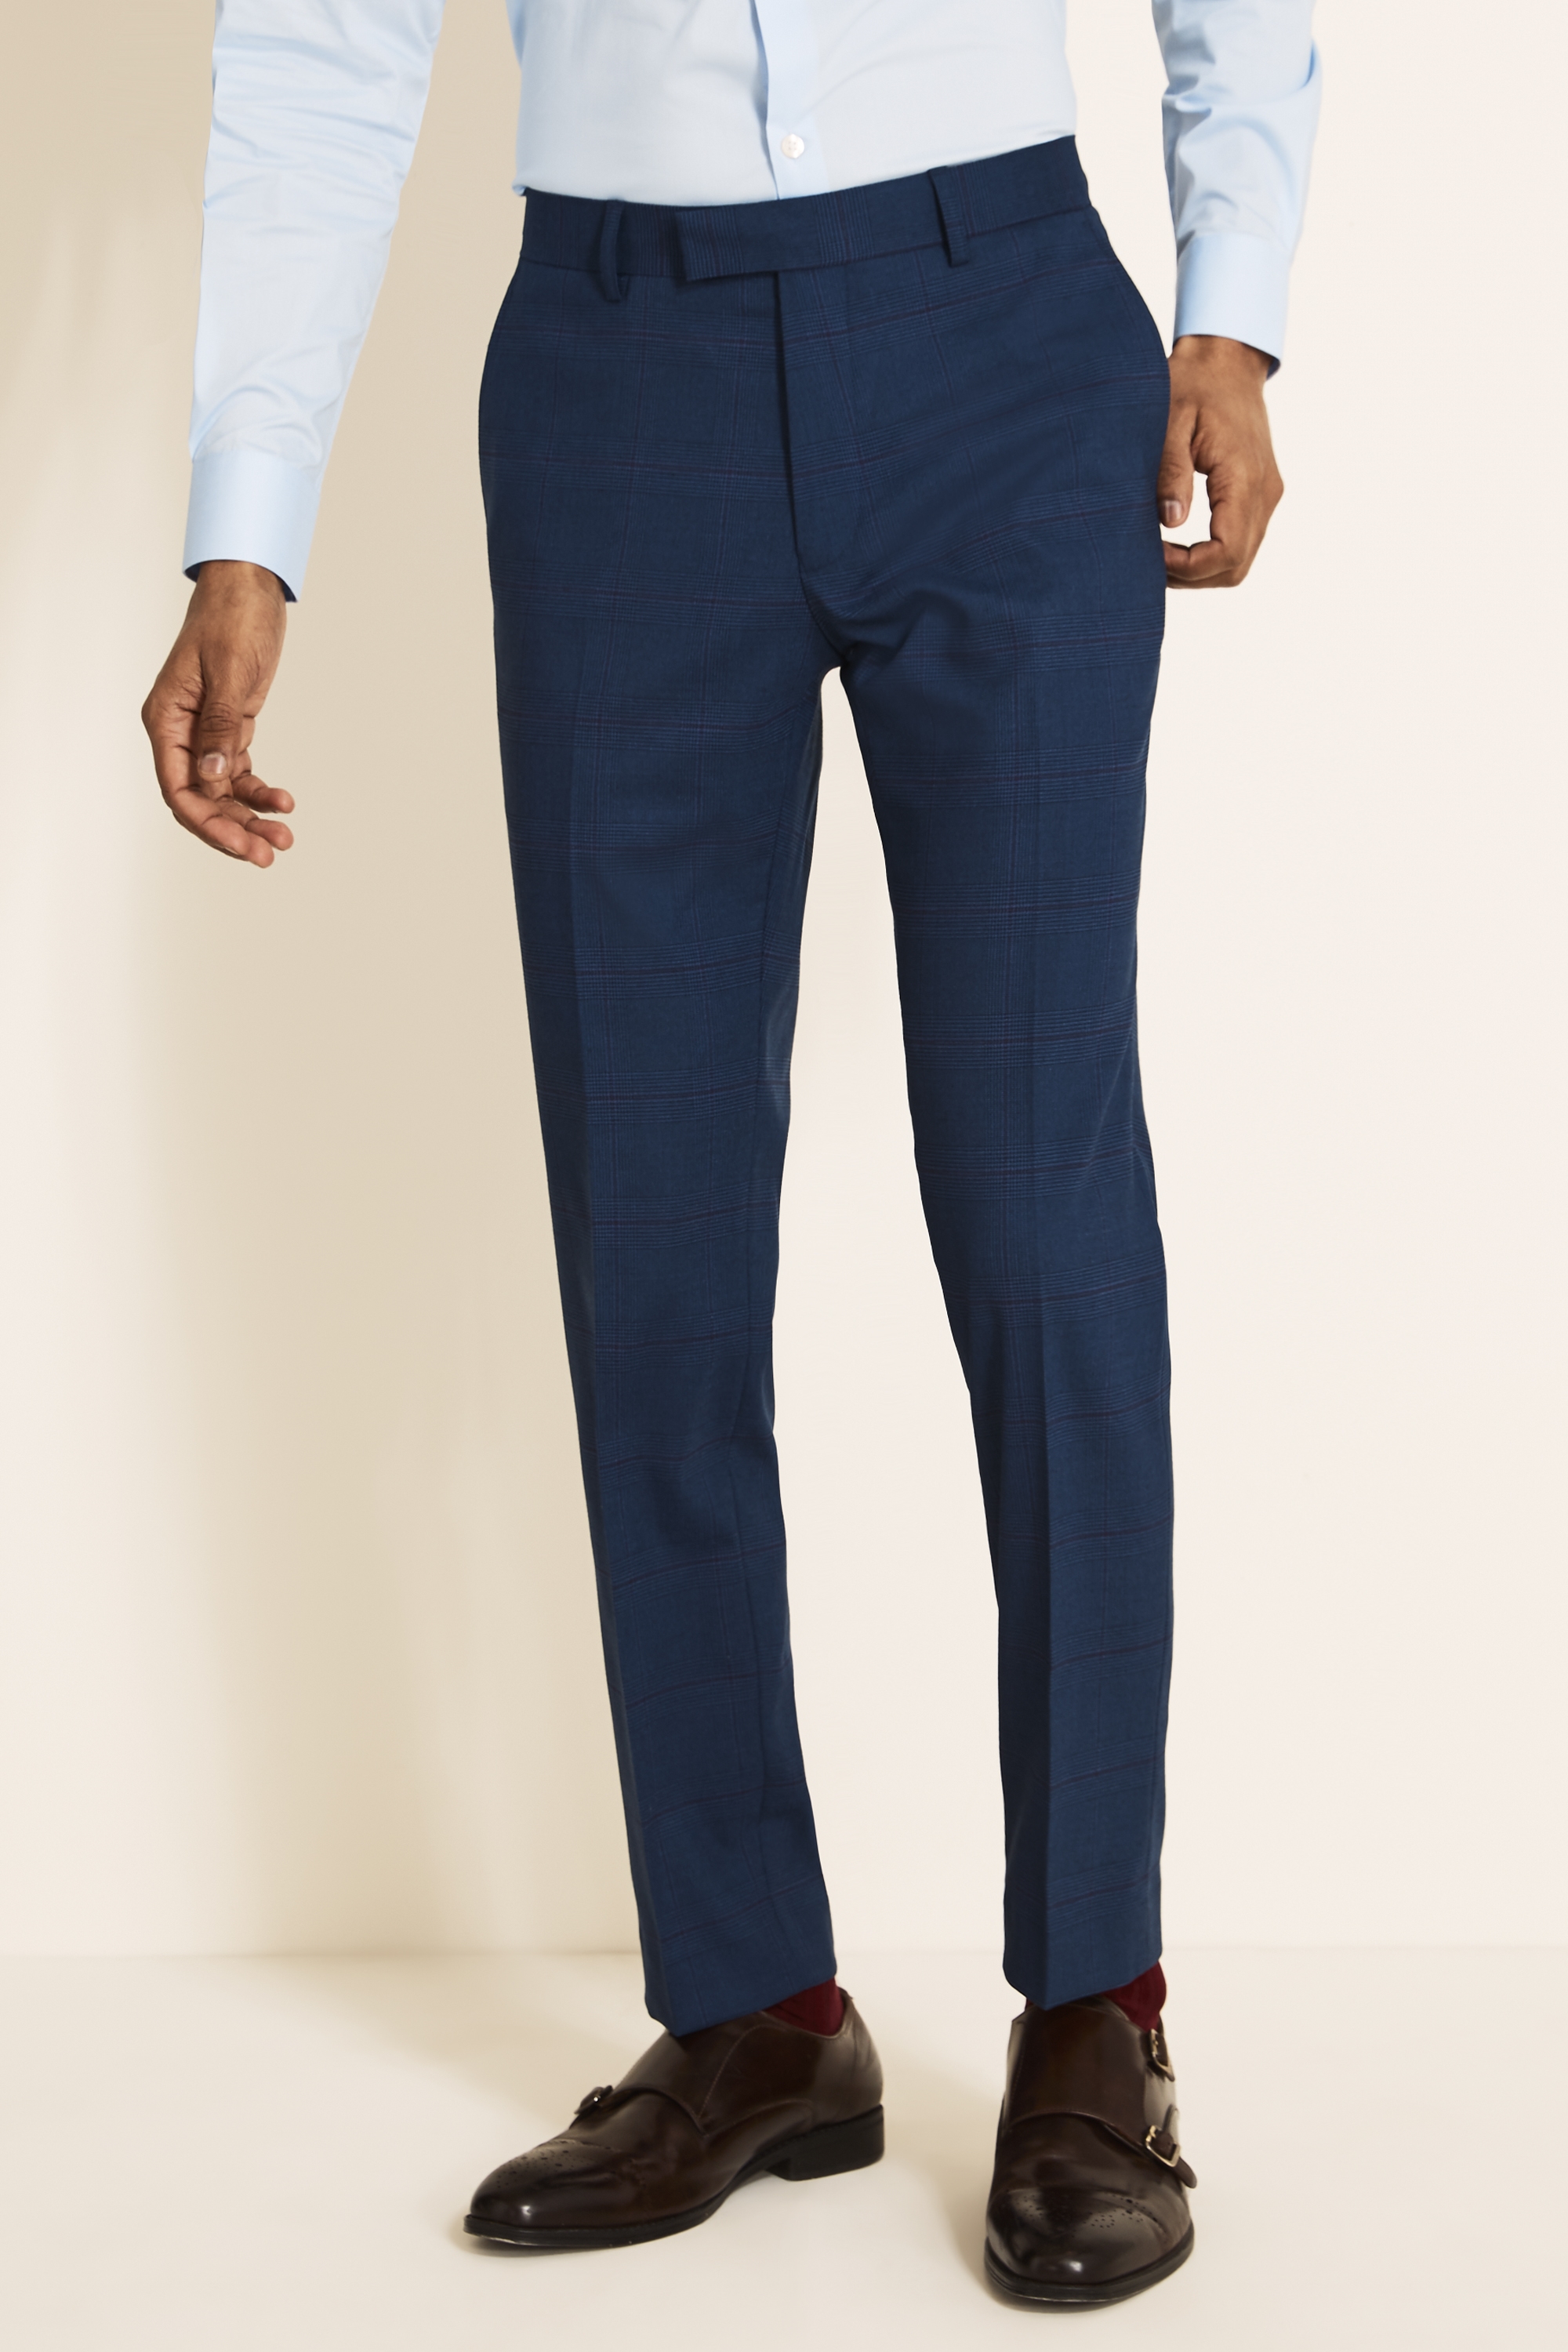 Moss Lonodn Slim Fit Navy With Purple Check Trousers